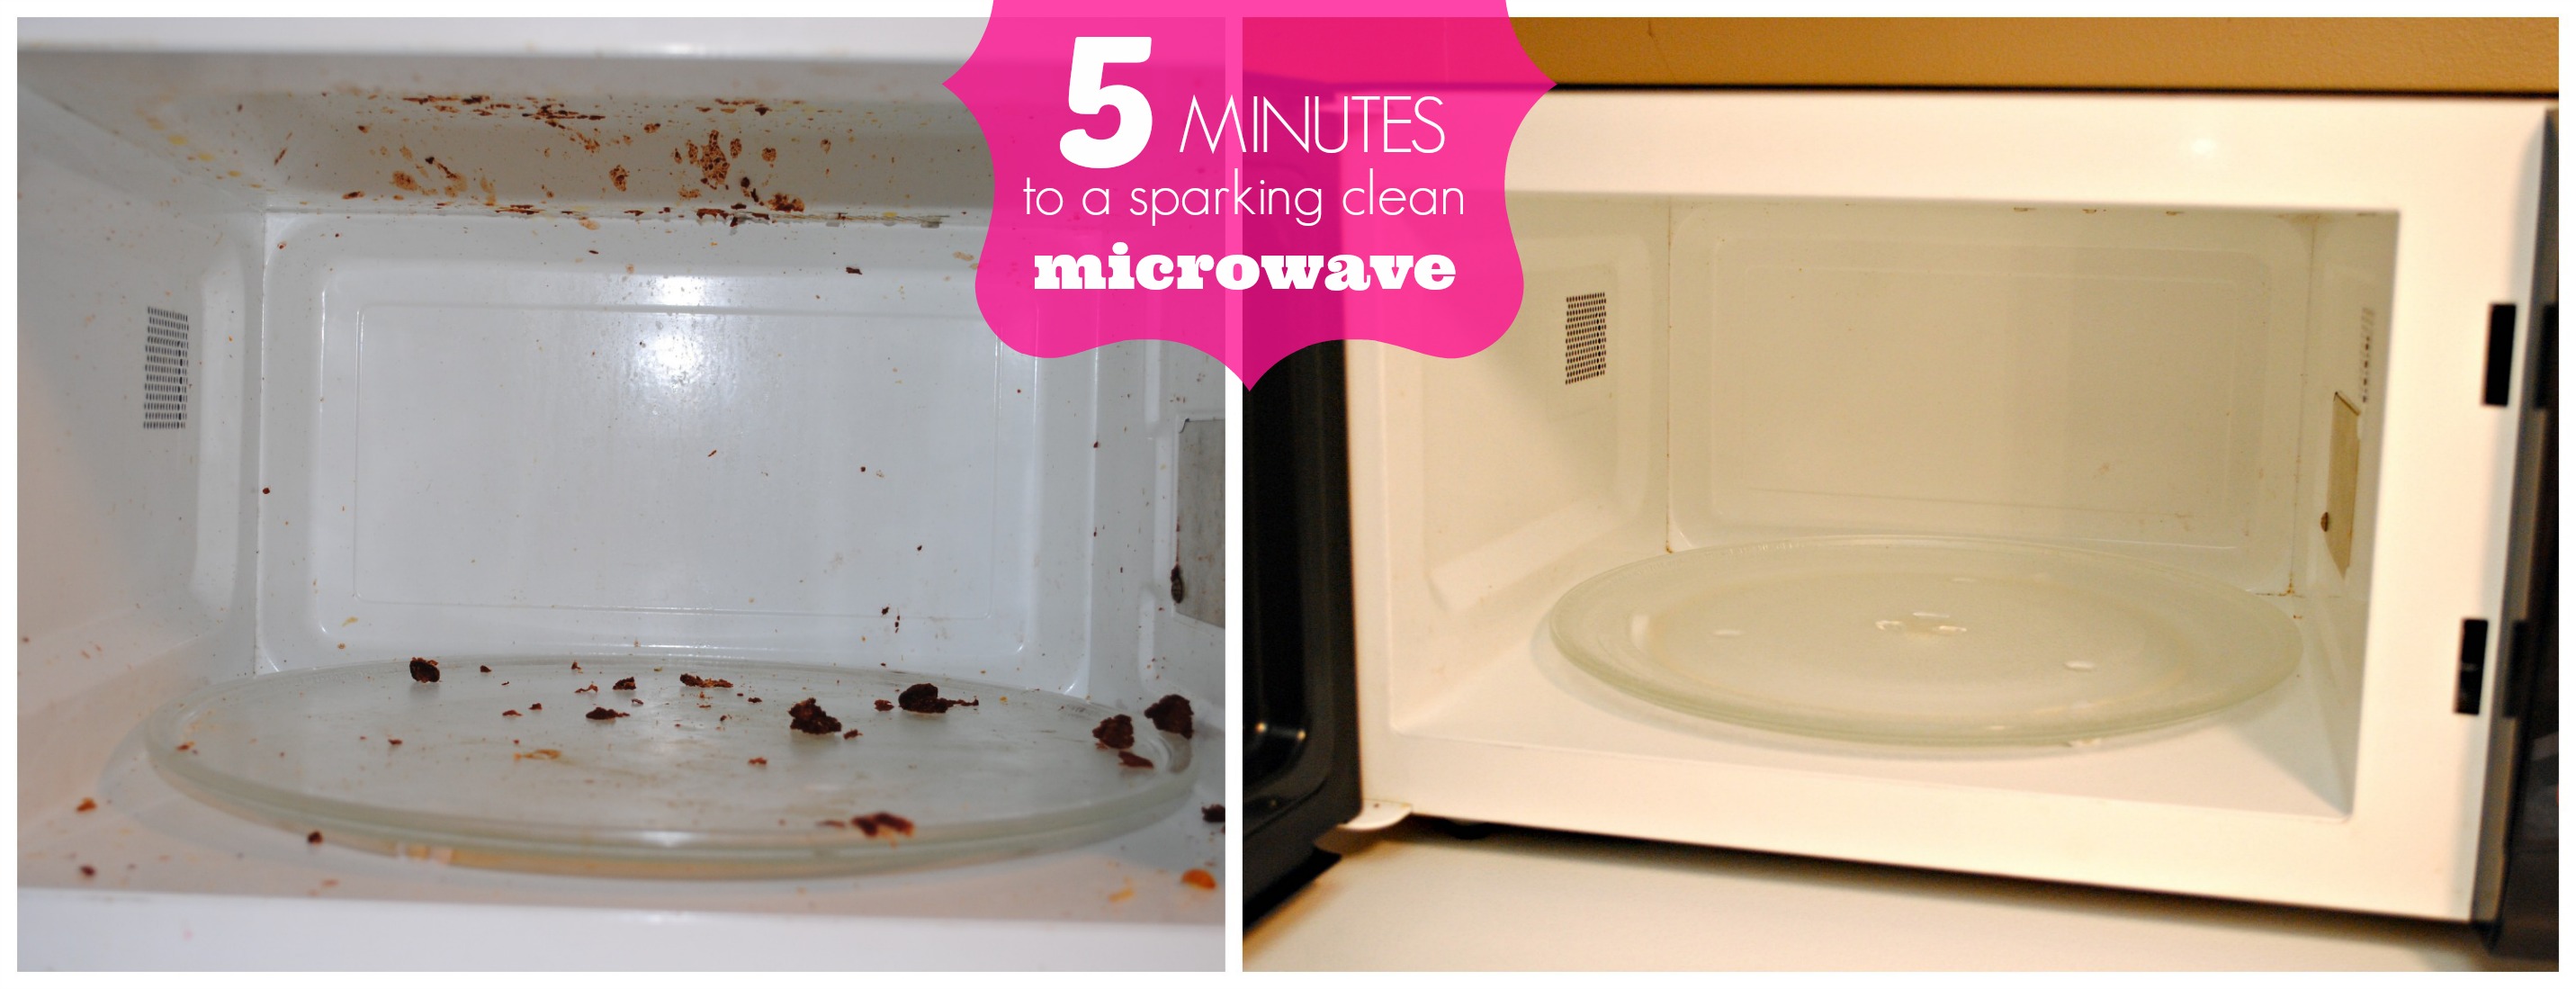 How to clean microwave